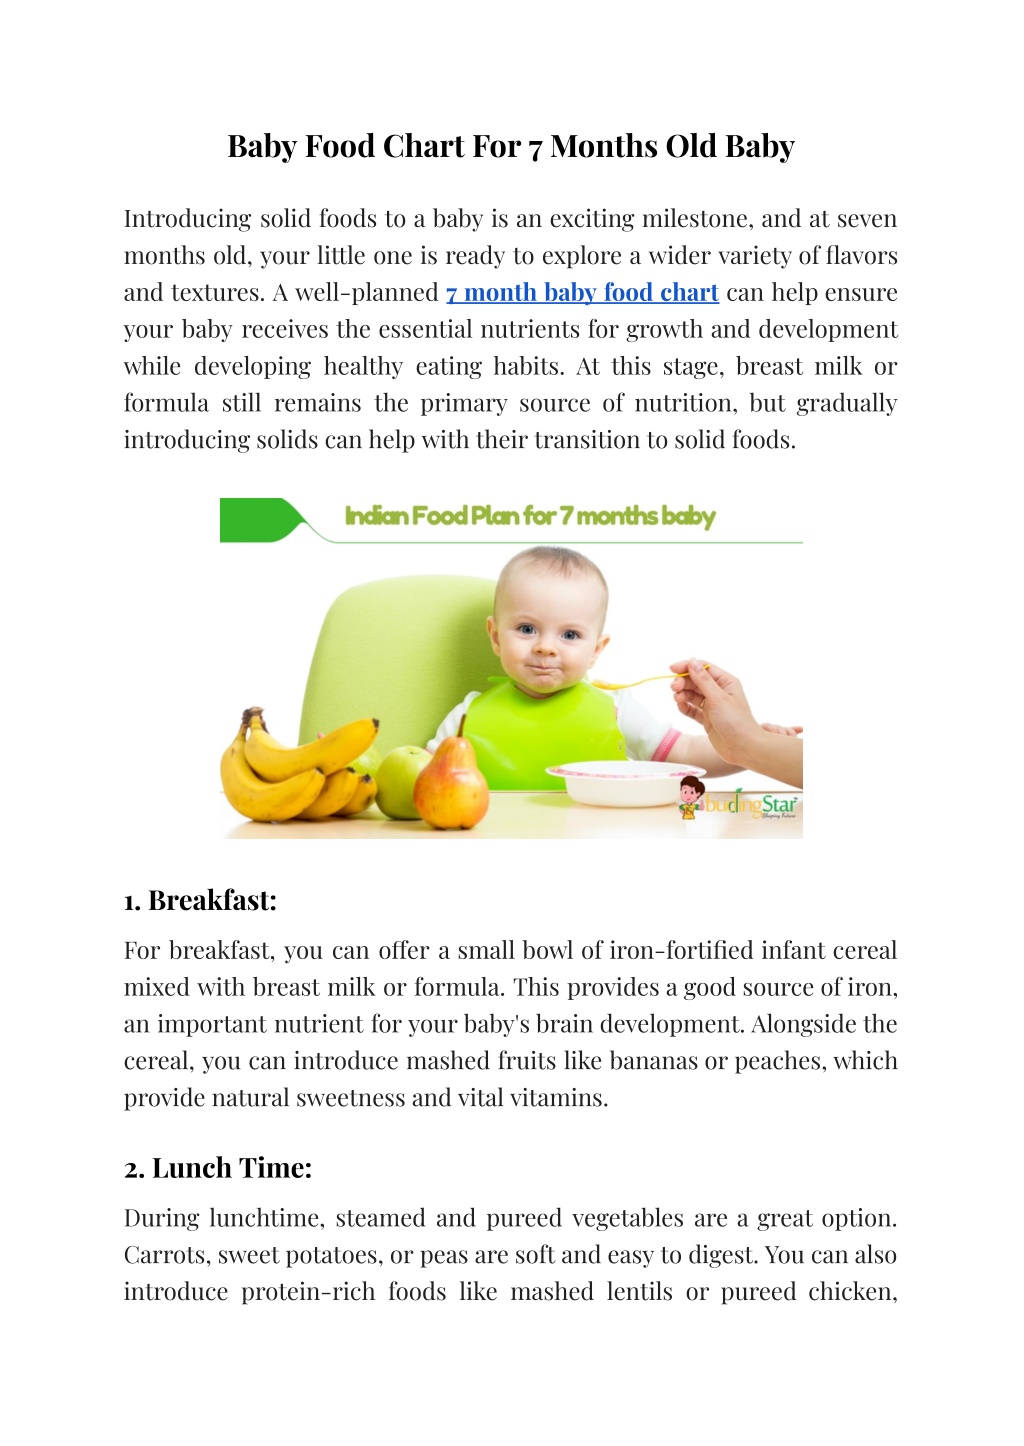 PPT - Baby Food Chart For 7 Months Old Baby PowerPoint Presentation ...